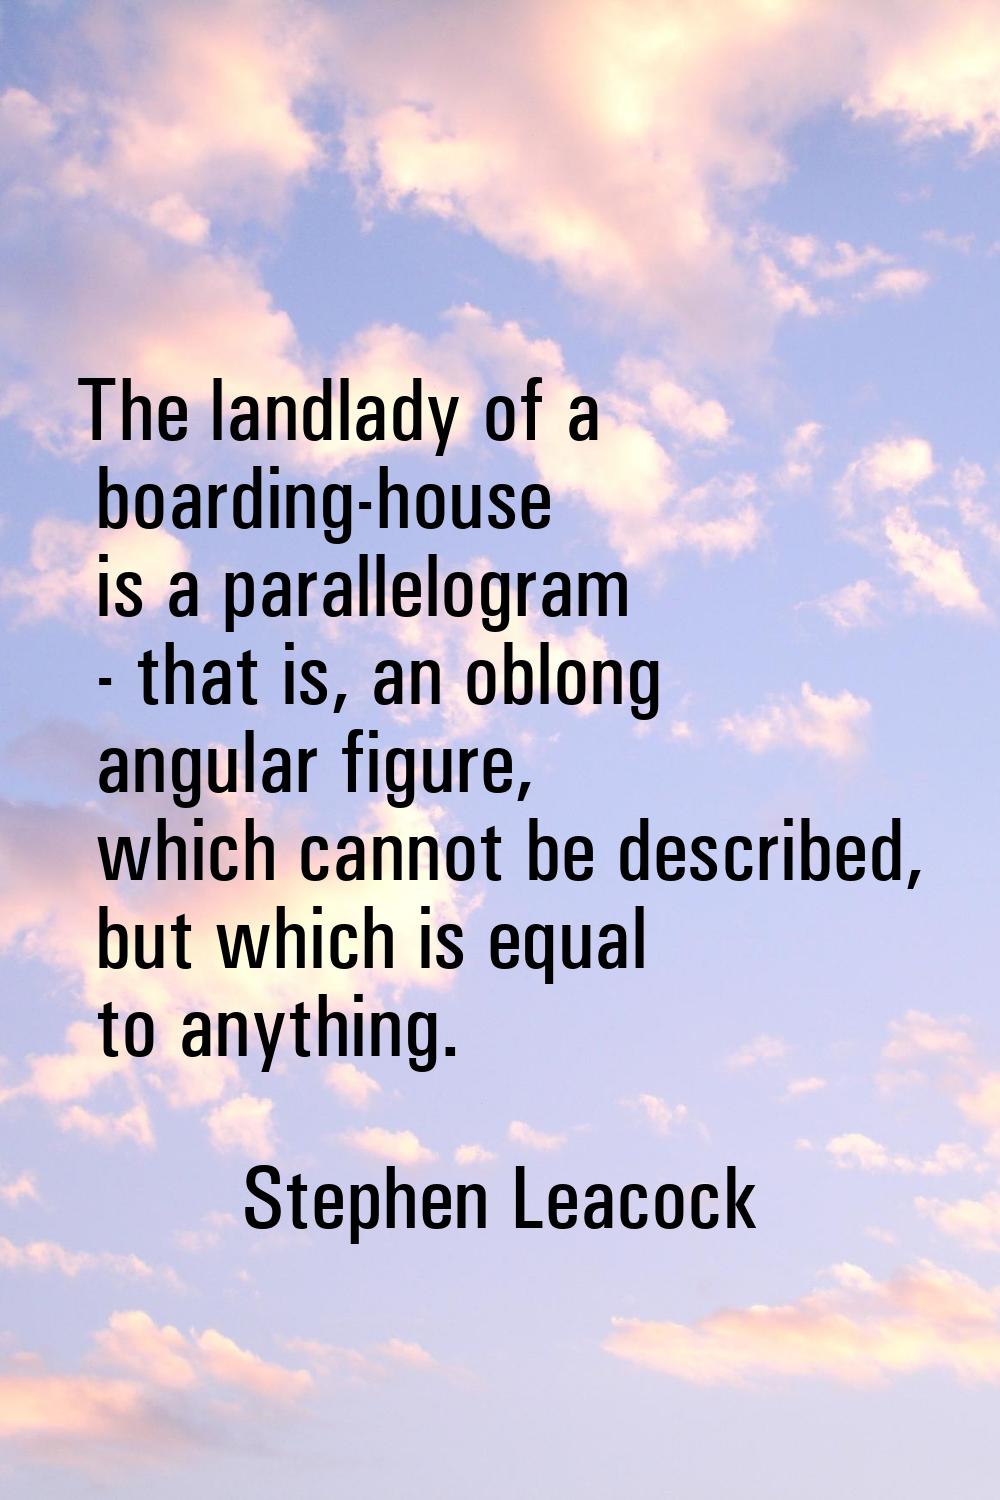 The landlady of a boarding-house is a parallelogram - that is, an oblong angular figure, which cann